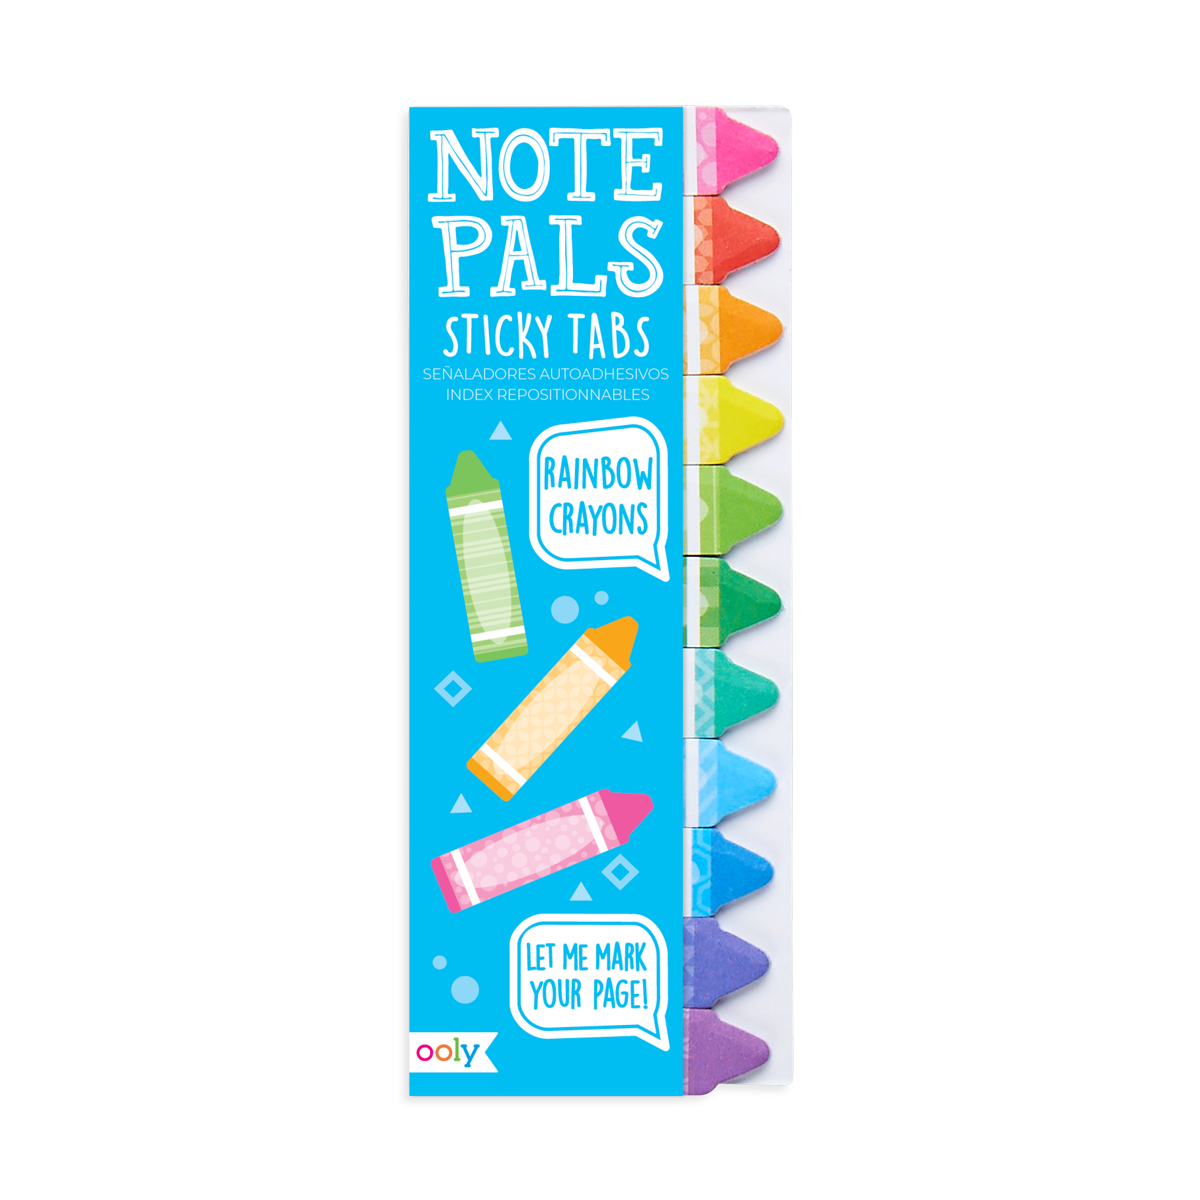 Ooly Note Pals Sticky Tabs - Sugar Joy